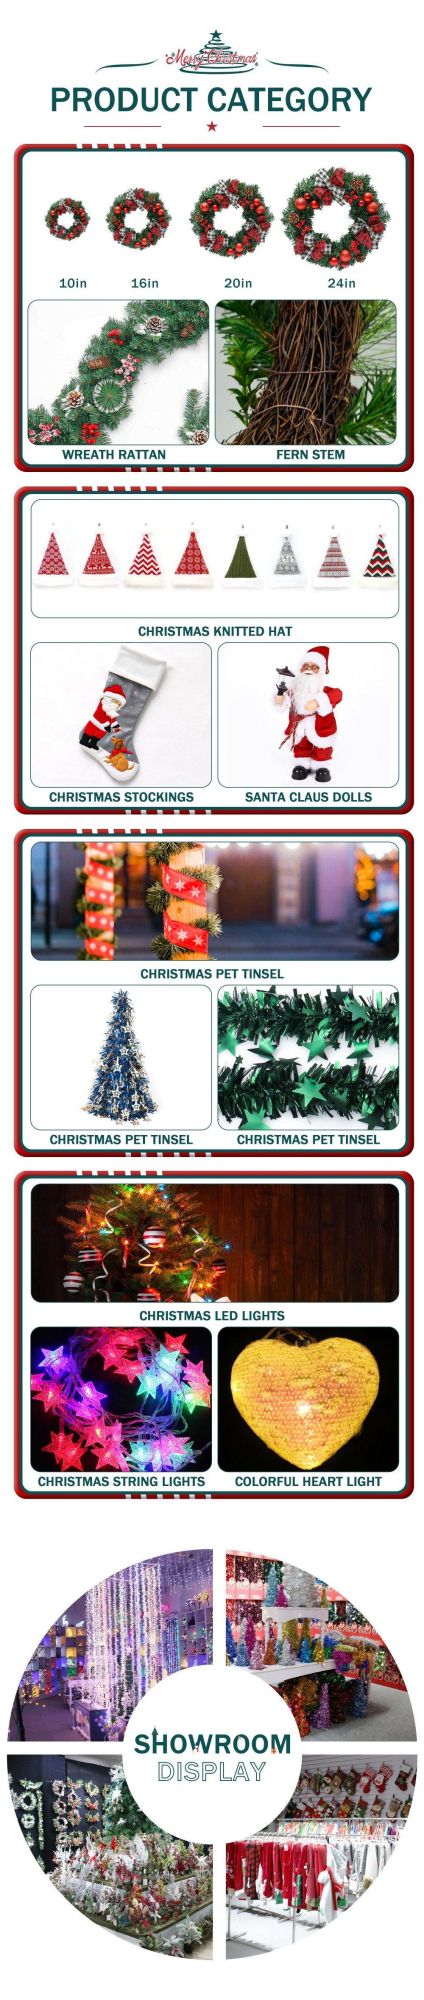 Pet Tinsel Garland Christmas Decoration with Ornaments Decorate